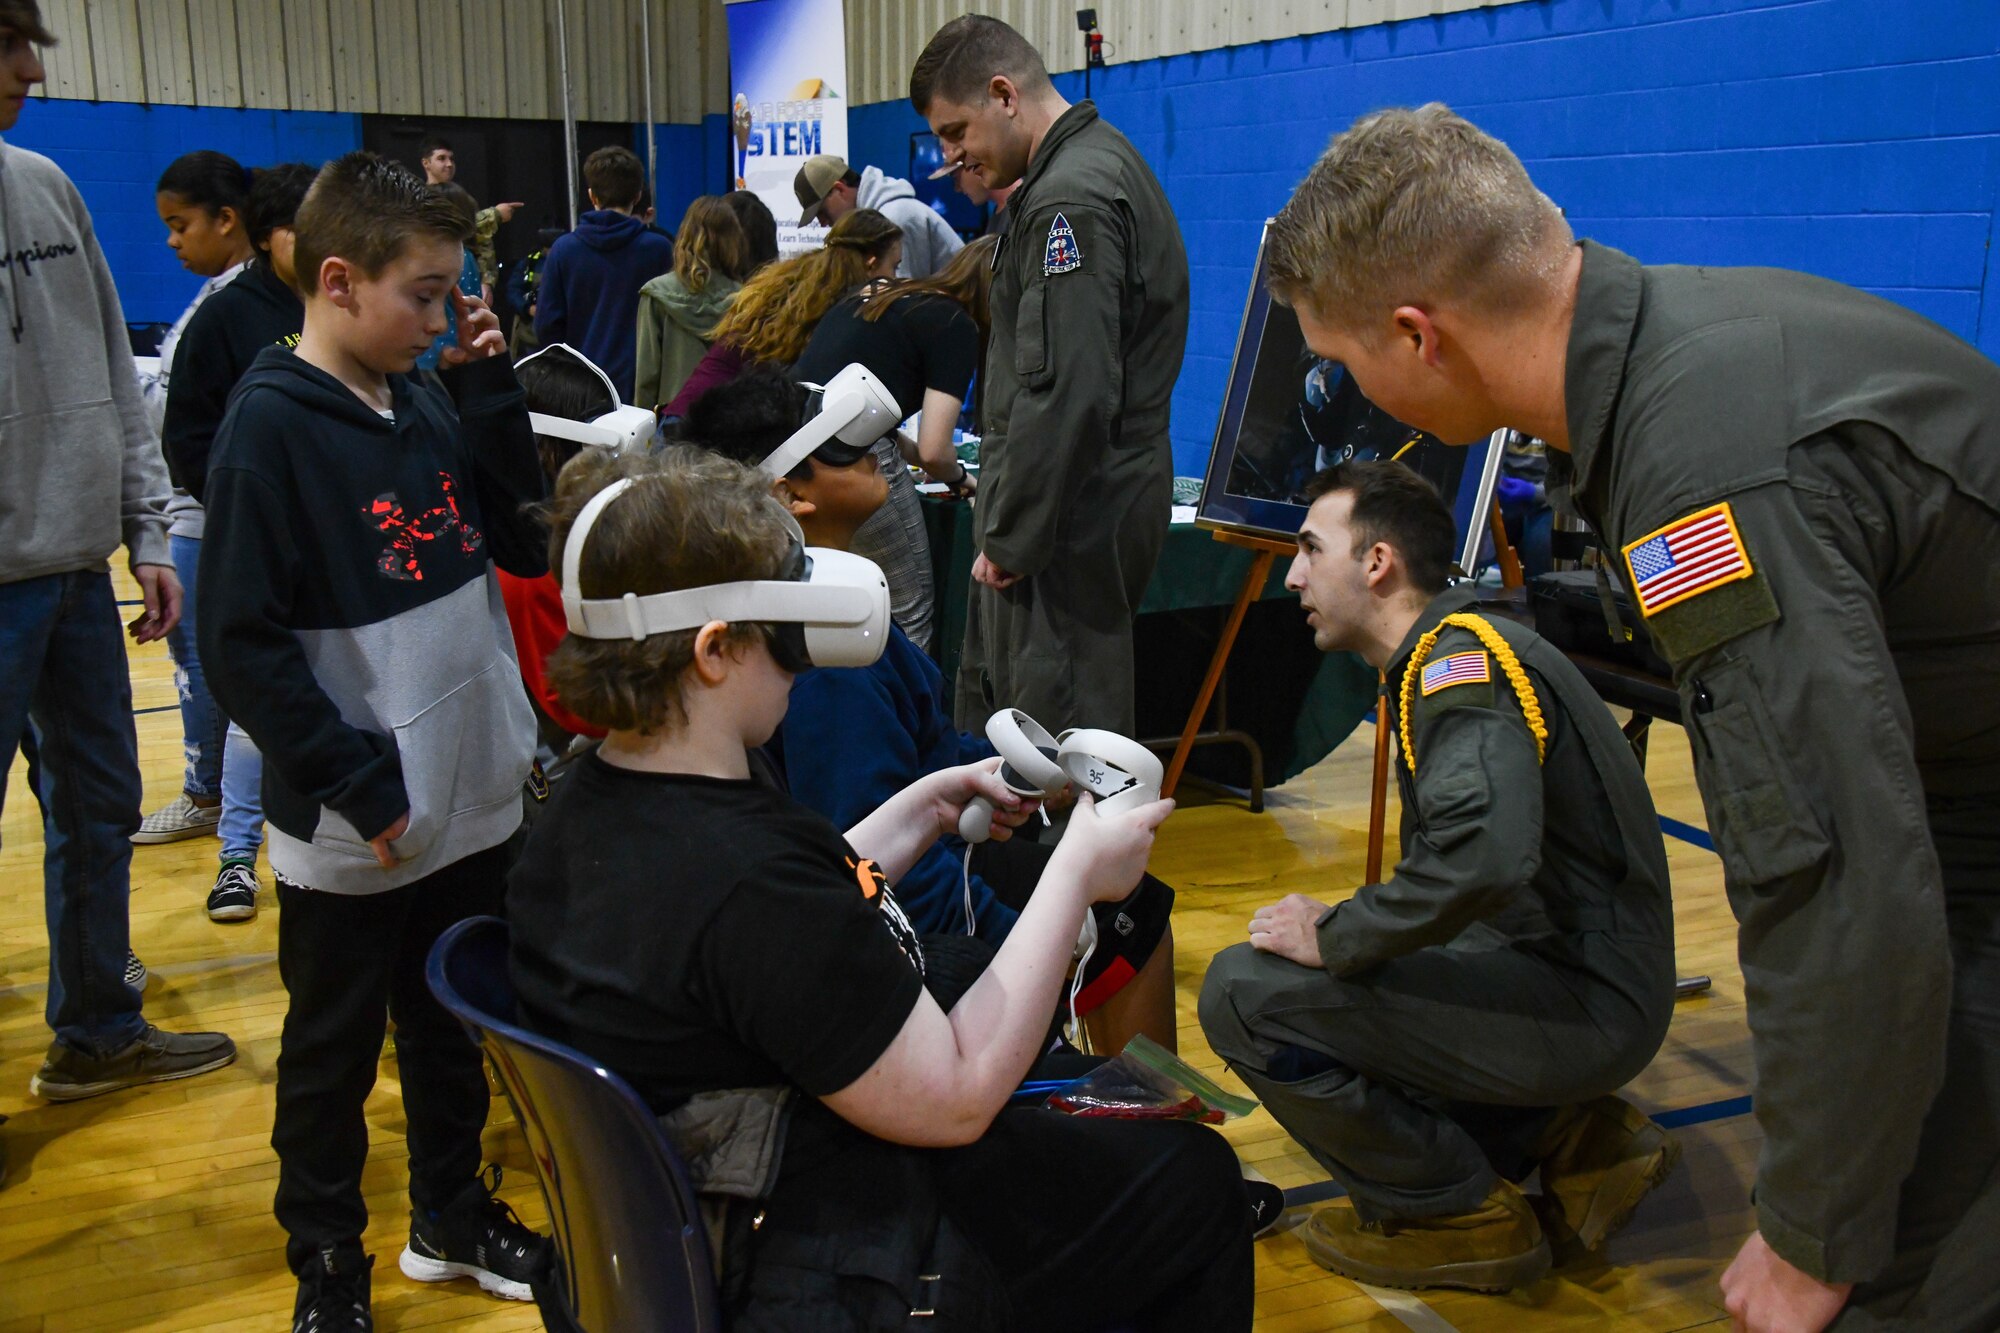 Students from Altus Junior High School use a virtual reality (VR) system operated by students and instructors of the 97th Training Squadron at Altus High School, Altus, Oklahoma, March 30, 2022. The students received the opportunity to simulate in-flight refueling of a C-17 Globemaster III at the Science, Technology, Engineering and Mathematics fair. (U.S. Air Force photo by Airman 1st Class Miyah Gray)